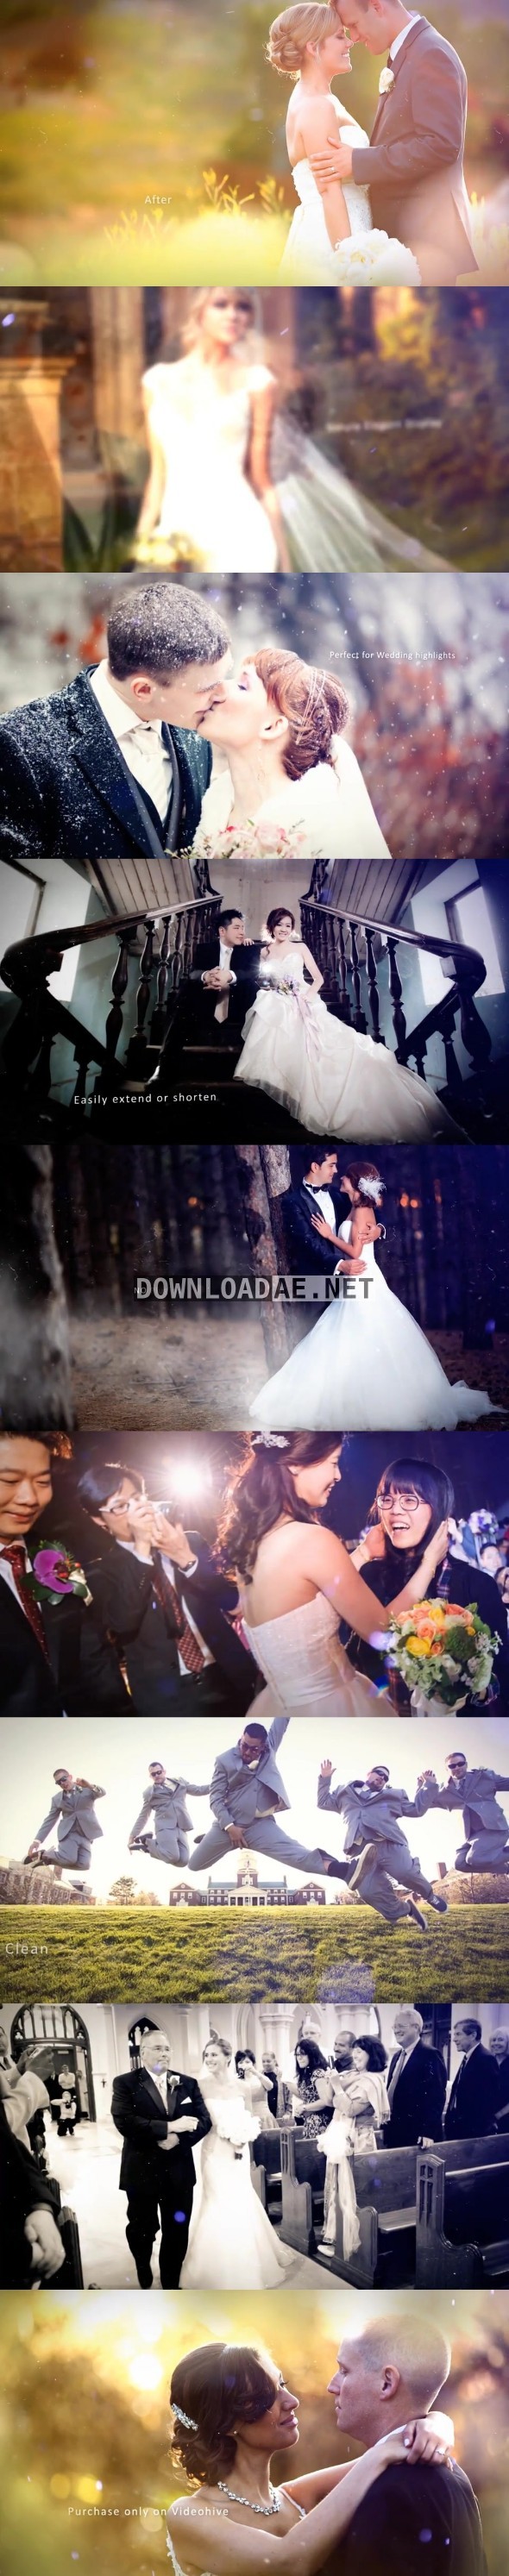 Videohive Wedding Photos 12434895 - Free After Effects Project Files